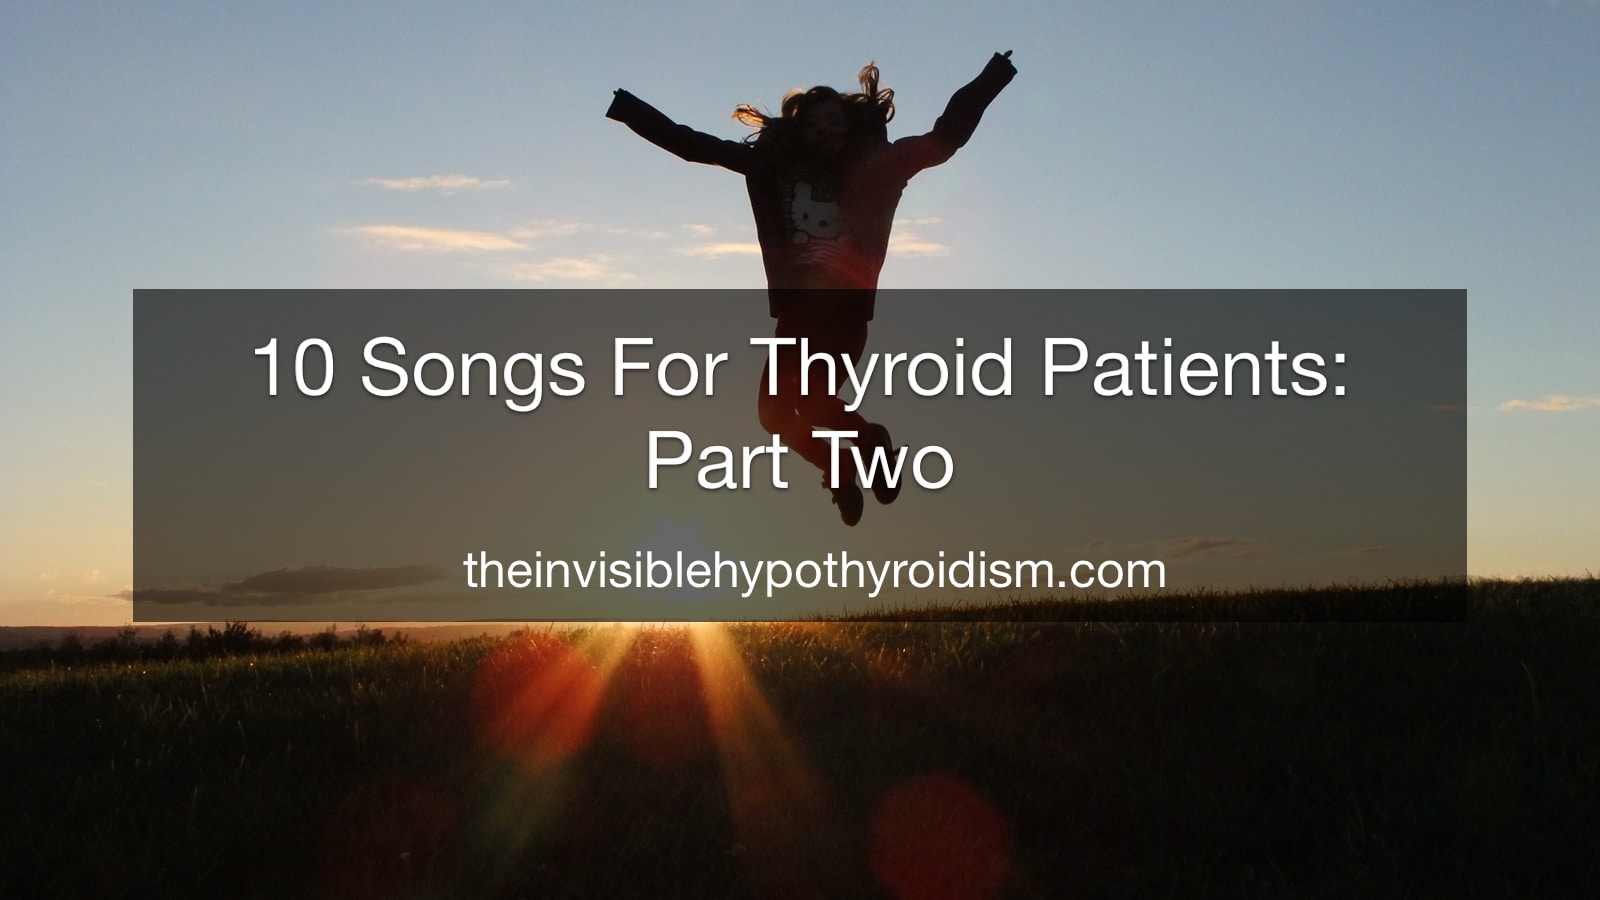 10 Songs For Thyroid Patients: Part Two